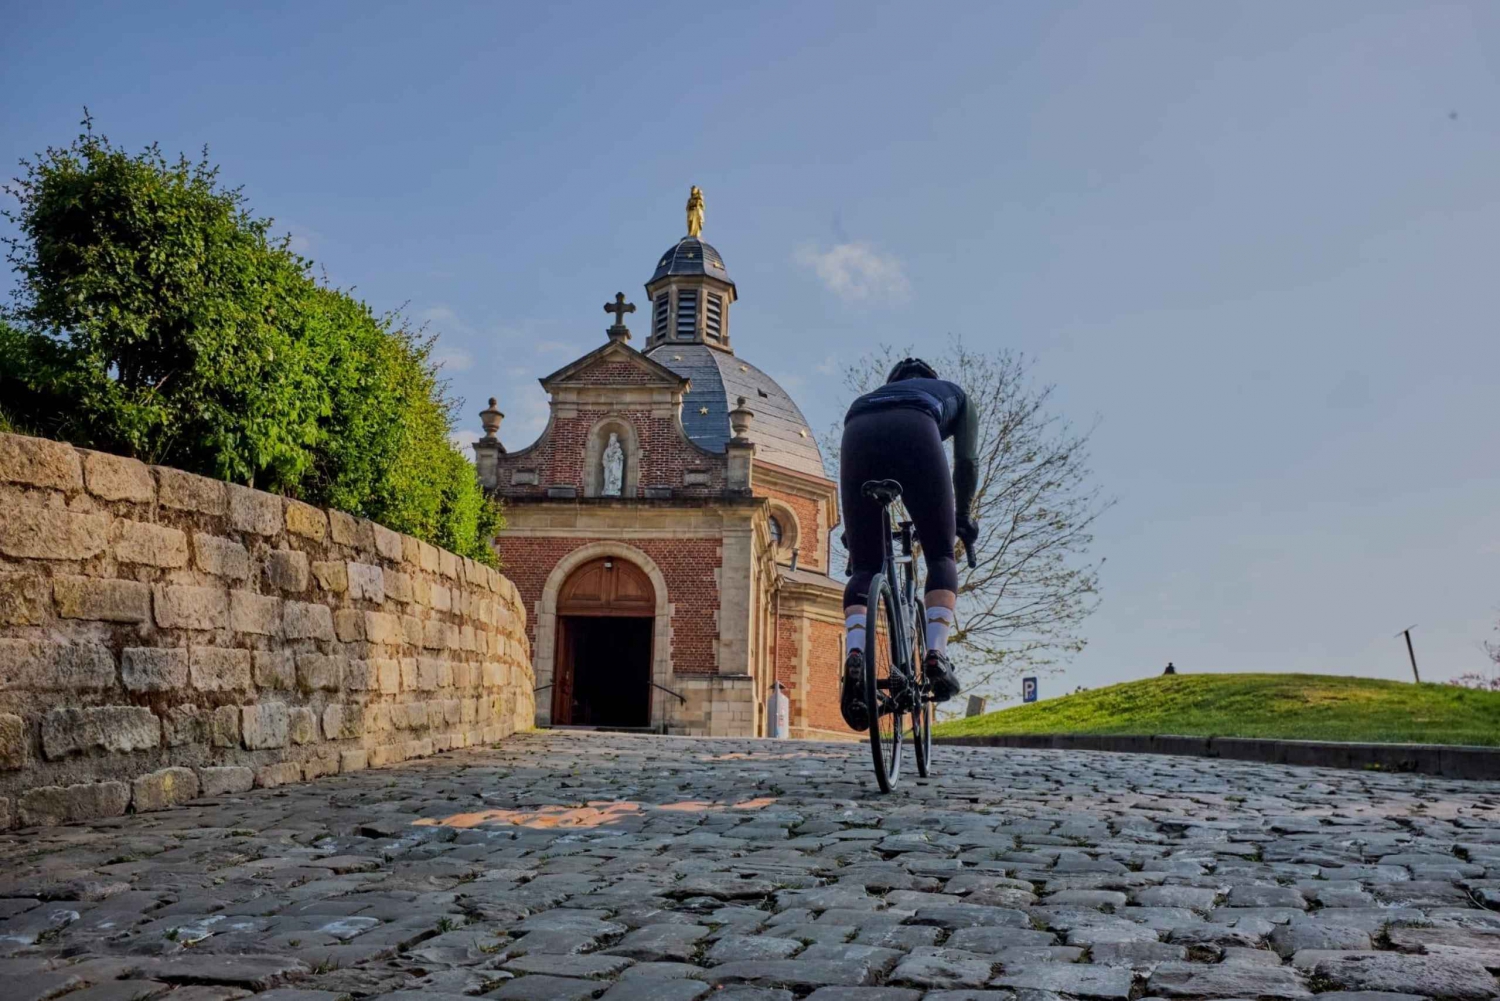 From Brussels to Flanders 100km road cycling tour